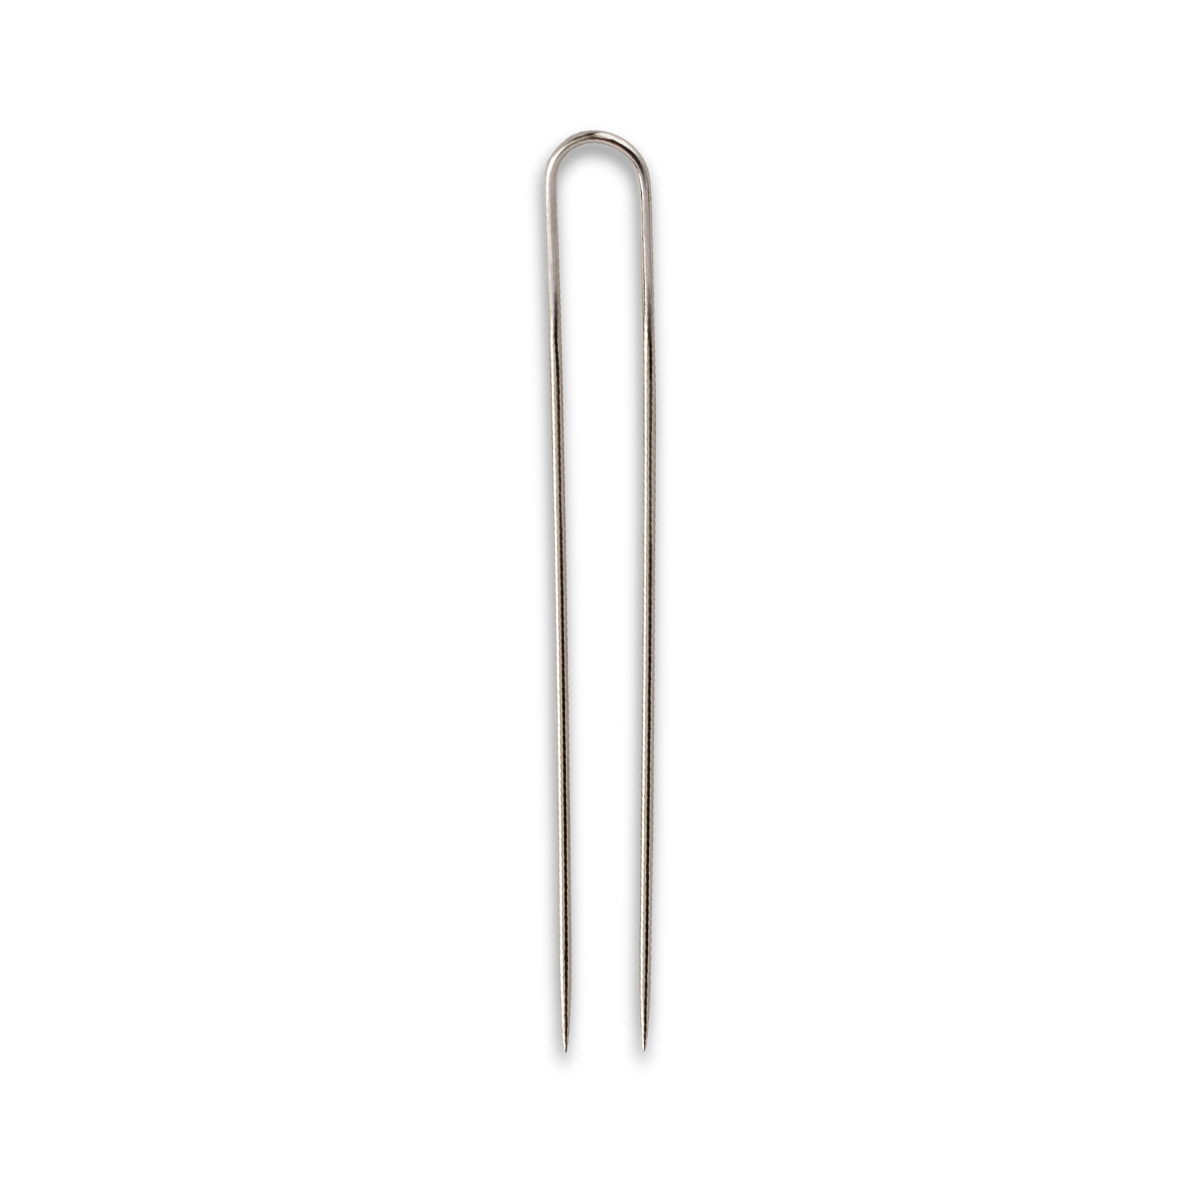 200Pcs Fork Pins, Stainless Steel Sewing U-Pins 0.7 Double Blocking Pin,  Silver